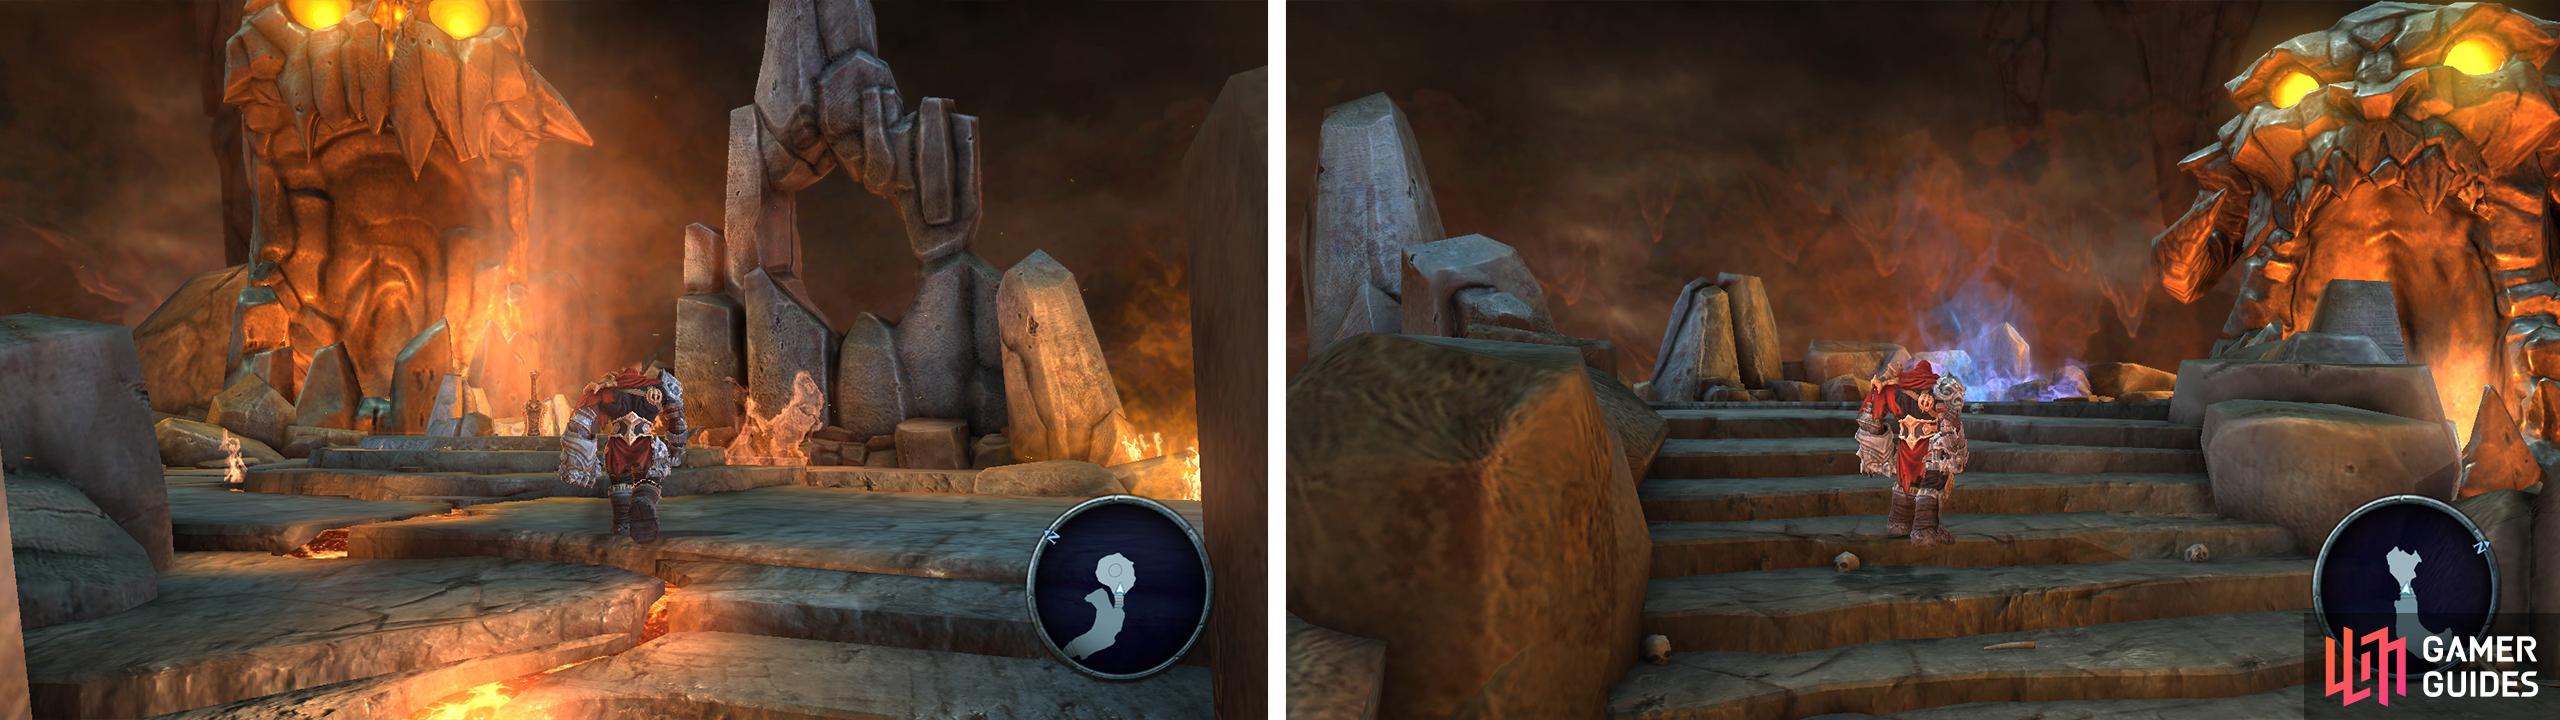 Interact with the sword (left) before entering the portal (right).